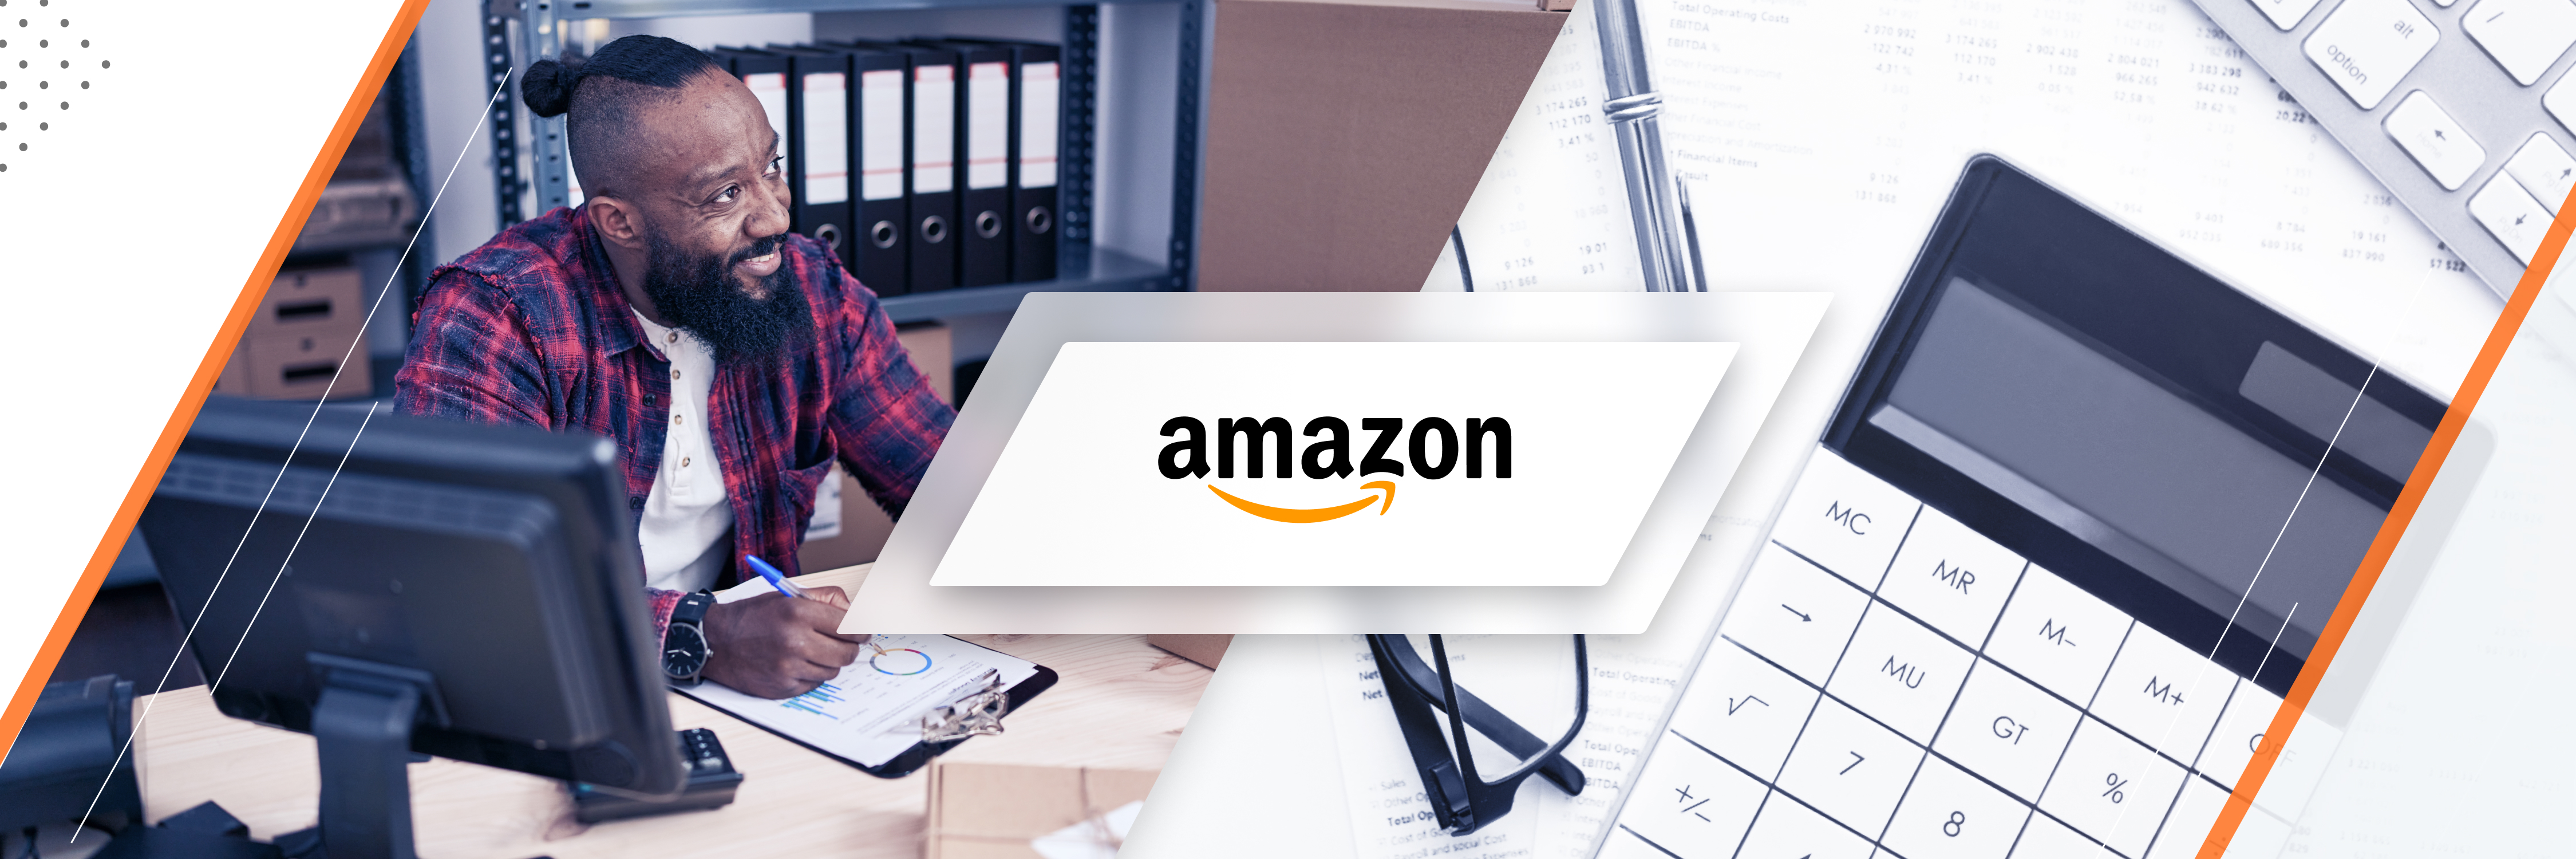 Blog-Featured-Image_1500x500_6 Amazon Accounting Mistakes to Avoid_1_021523@3x